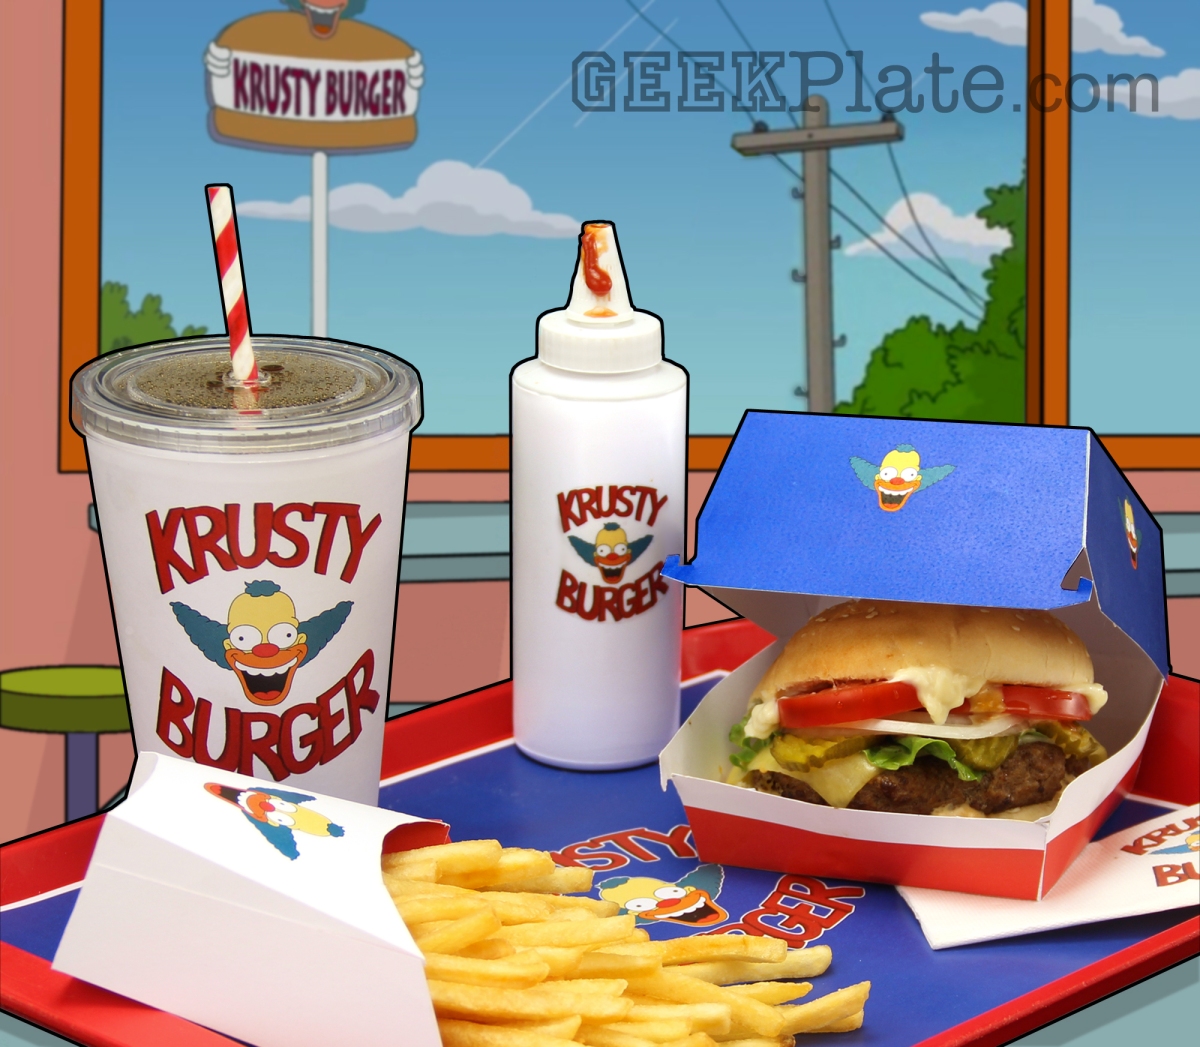 Real life Krusty Burger meal from The Simpsons